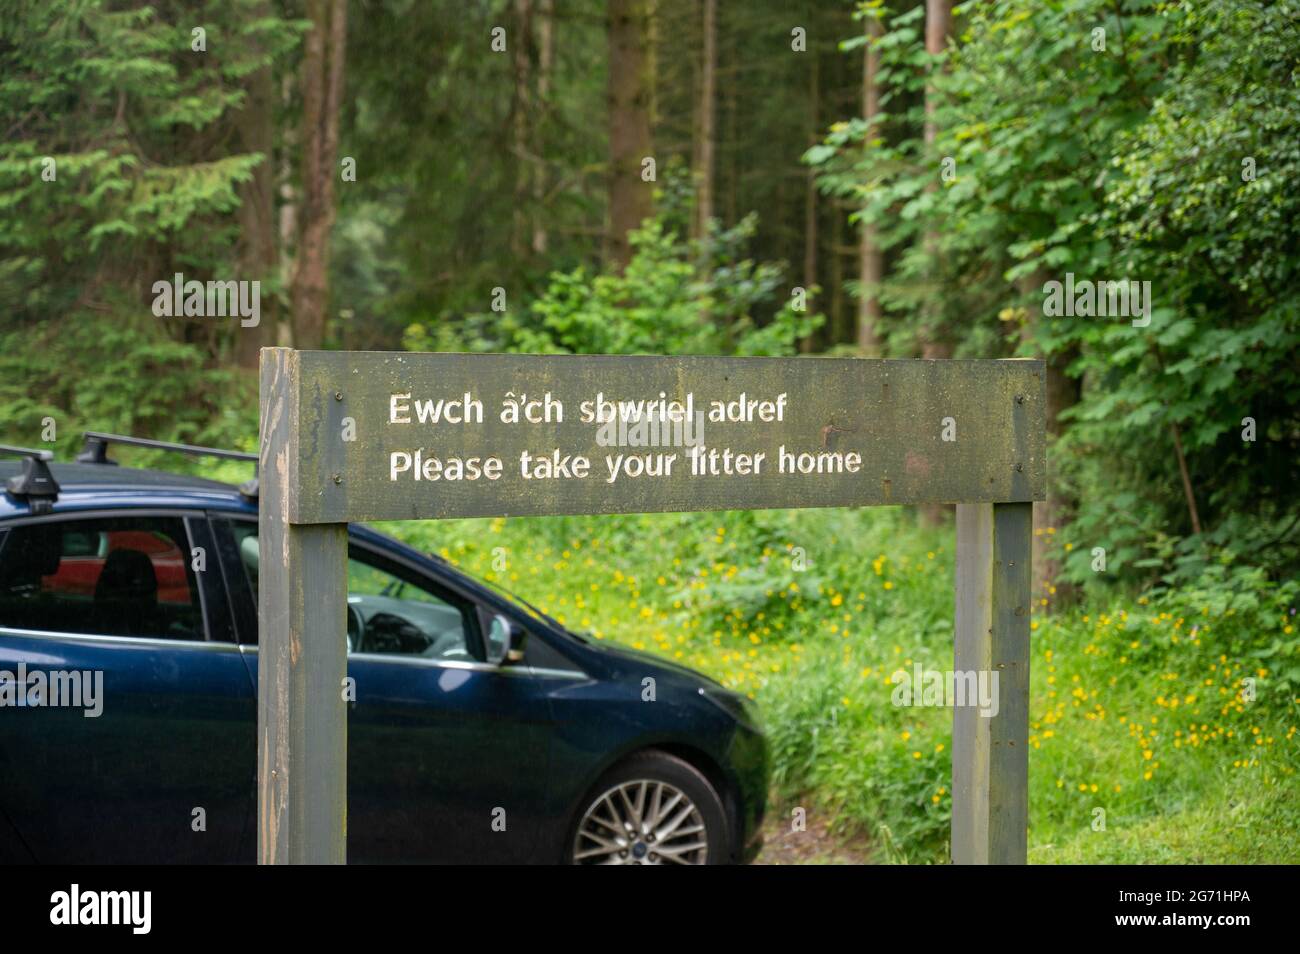 A wooden sign in Welsh and English saying “Please take your litter home” Stock Photo